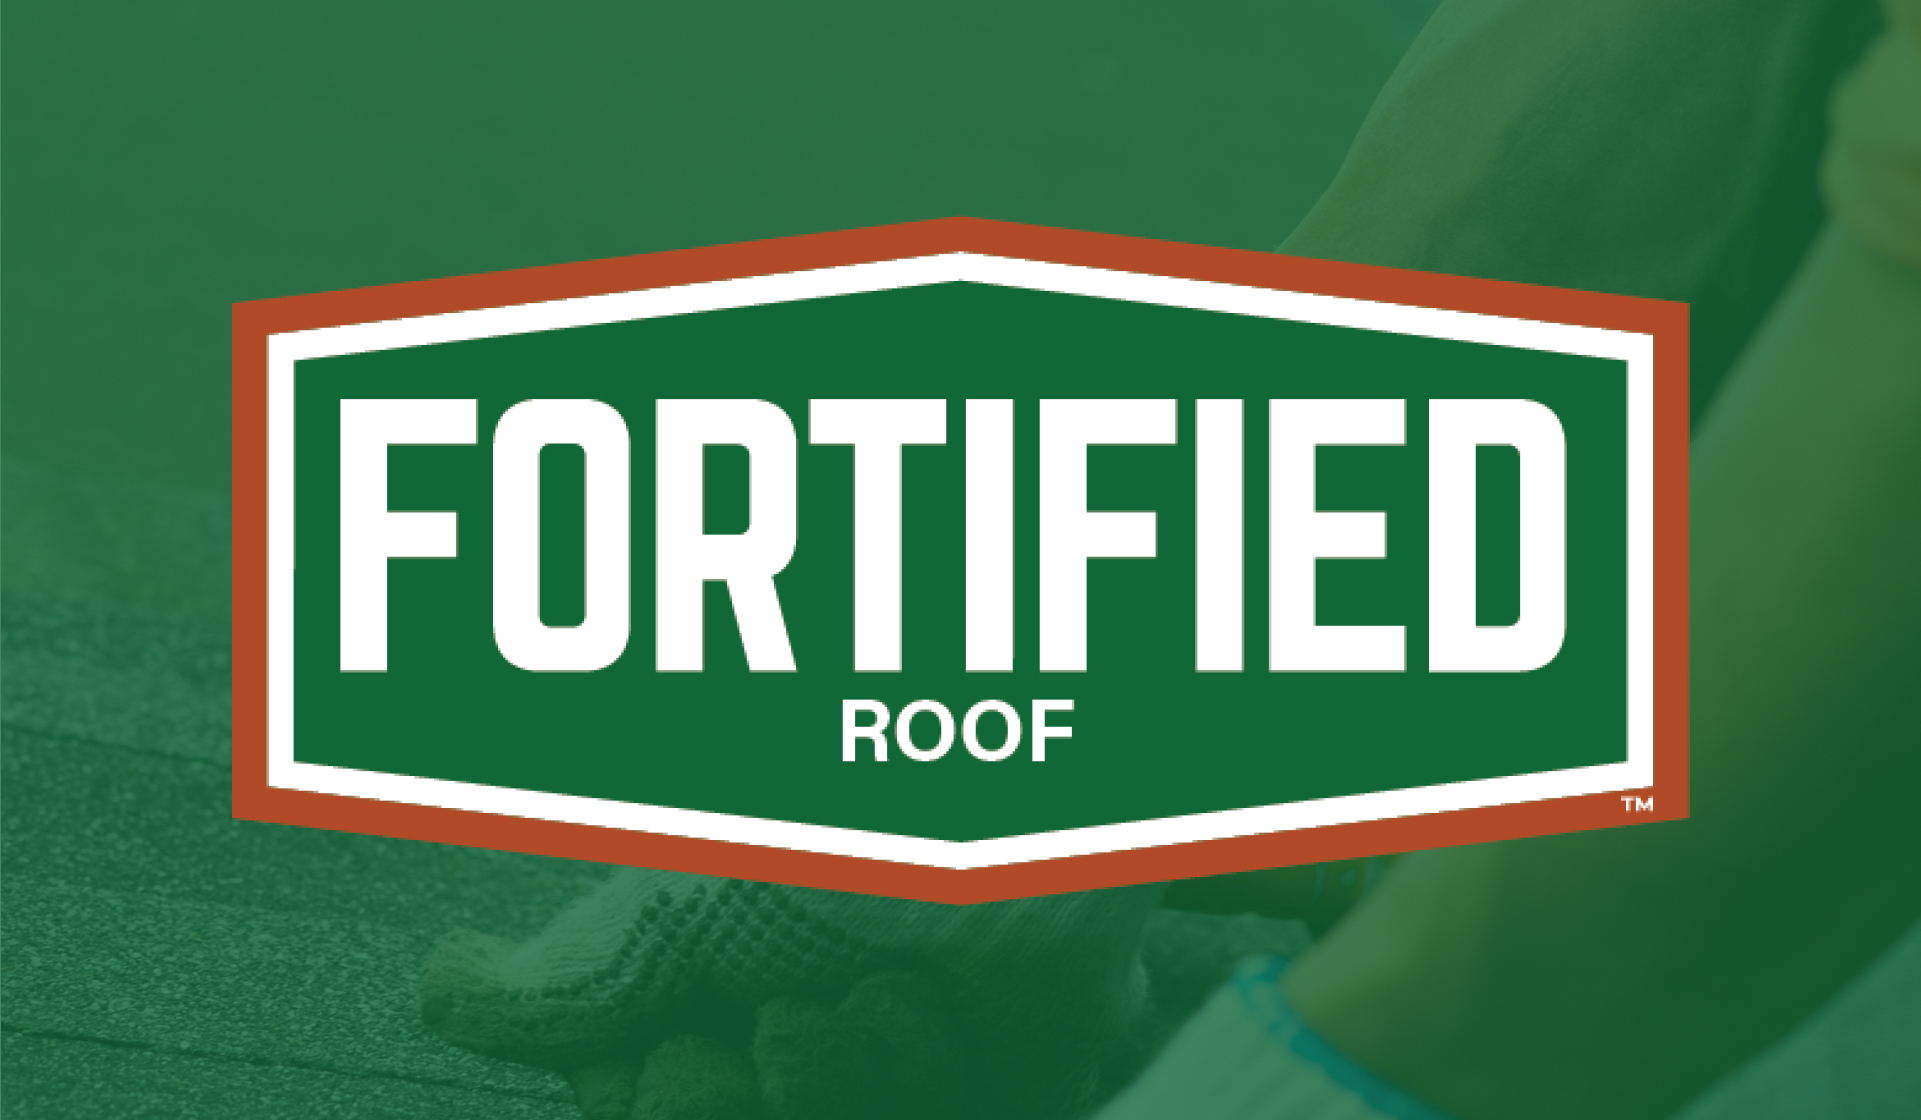 Garcia Roofing offers FORTIFIED roofing in Lafayette